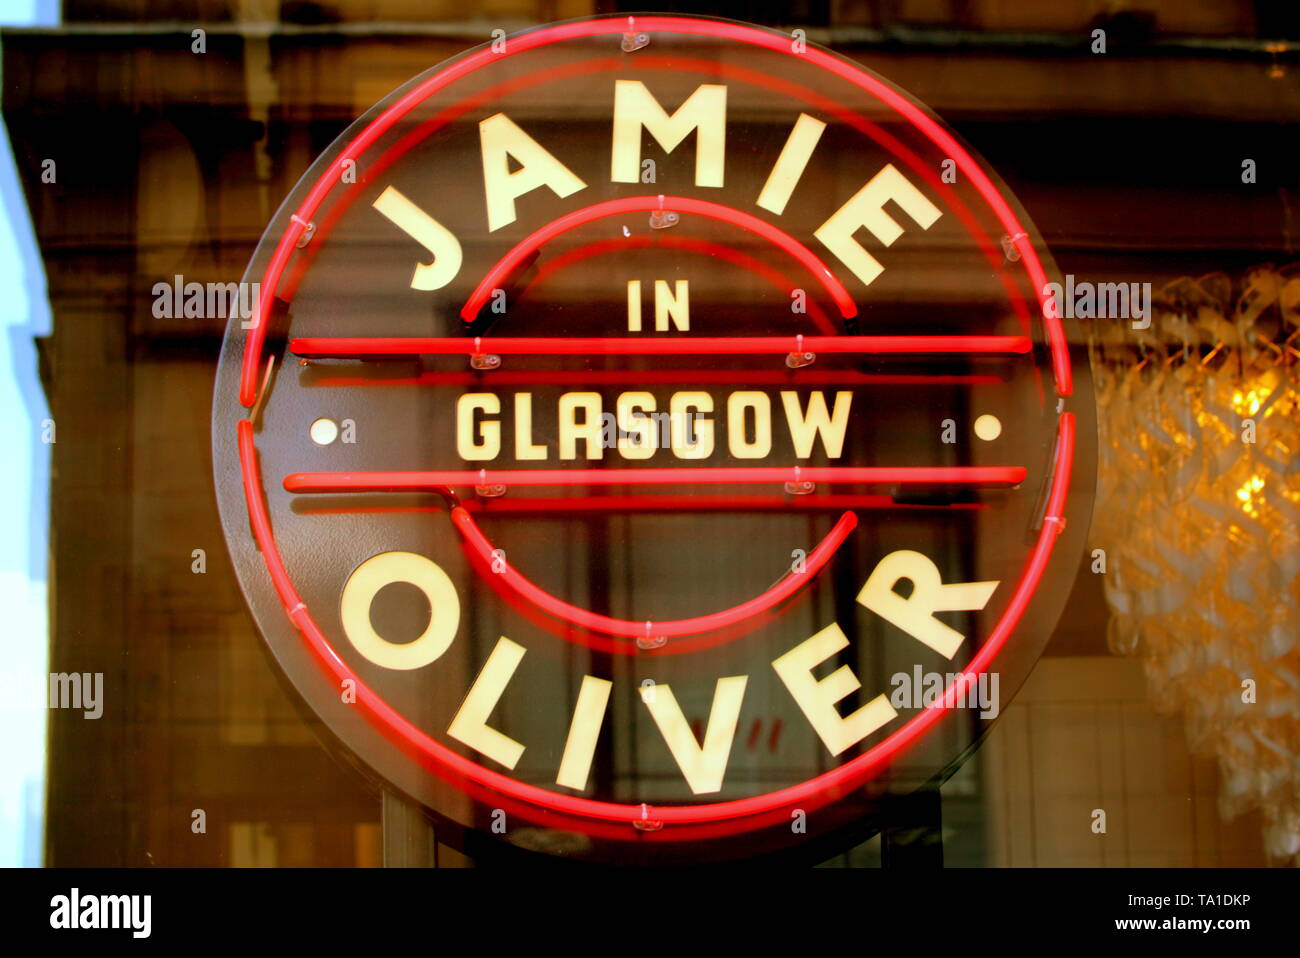 Glasgow, Scotland, UK 21st May, 2019. Jamie Oliver customers turned away after reading the closure notice as cleaners finished off the closed Glasgow restaurant in George Square in the prestigious city centre location. Gerard Ferry/Alamy Live News Stock Photo